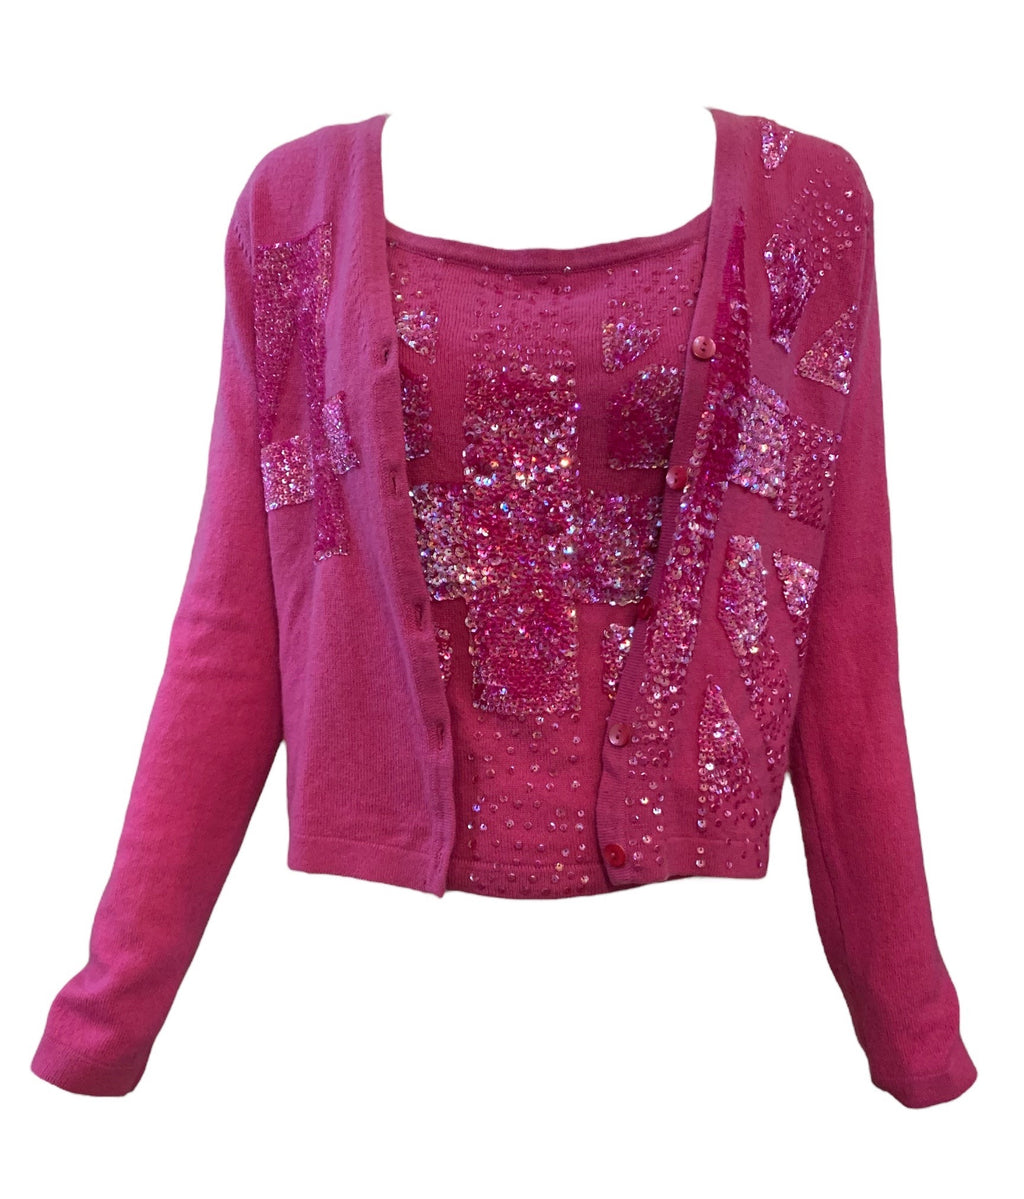 Fake (The Label) Hot Pink Cashmere Twinset with Sequins FRONT 1 of 5